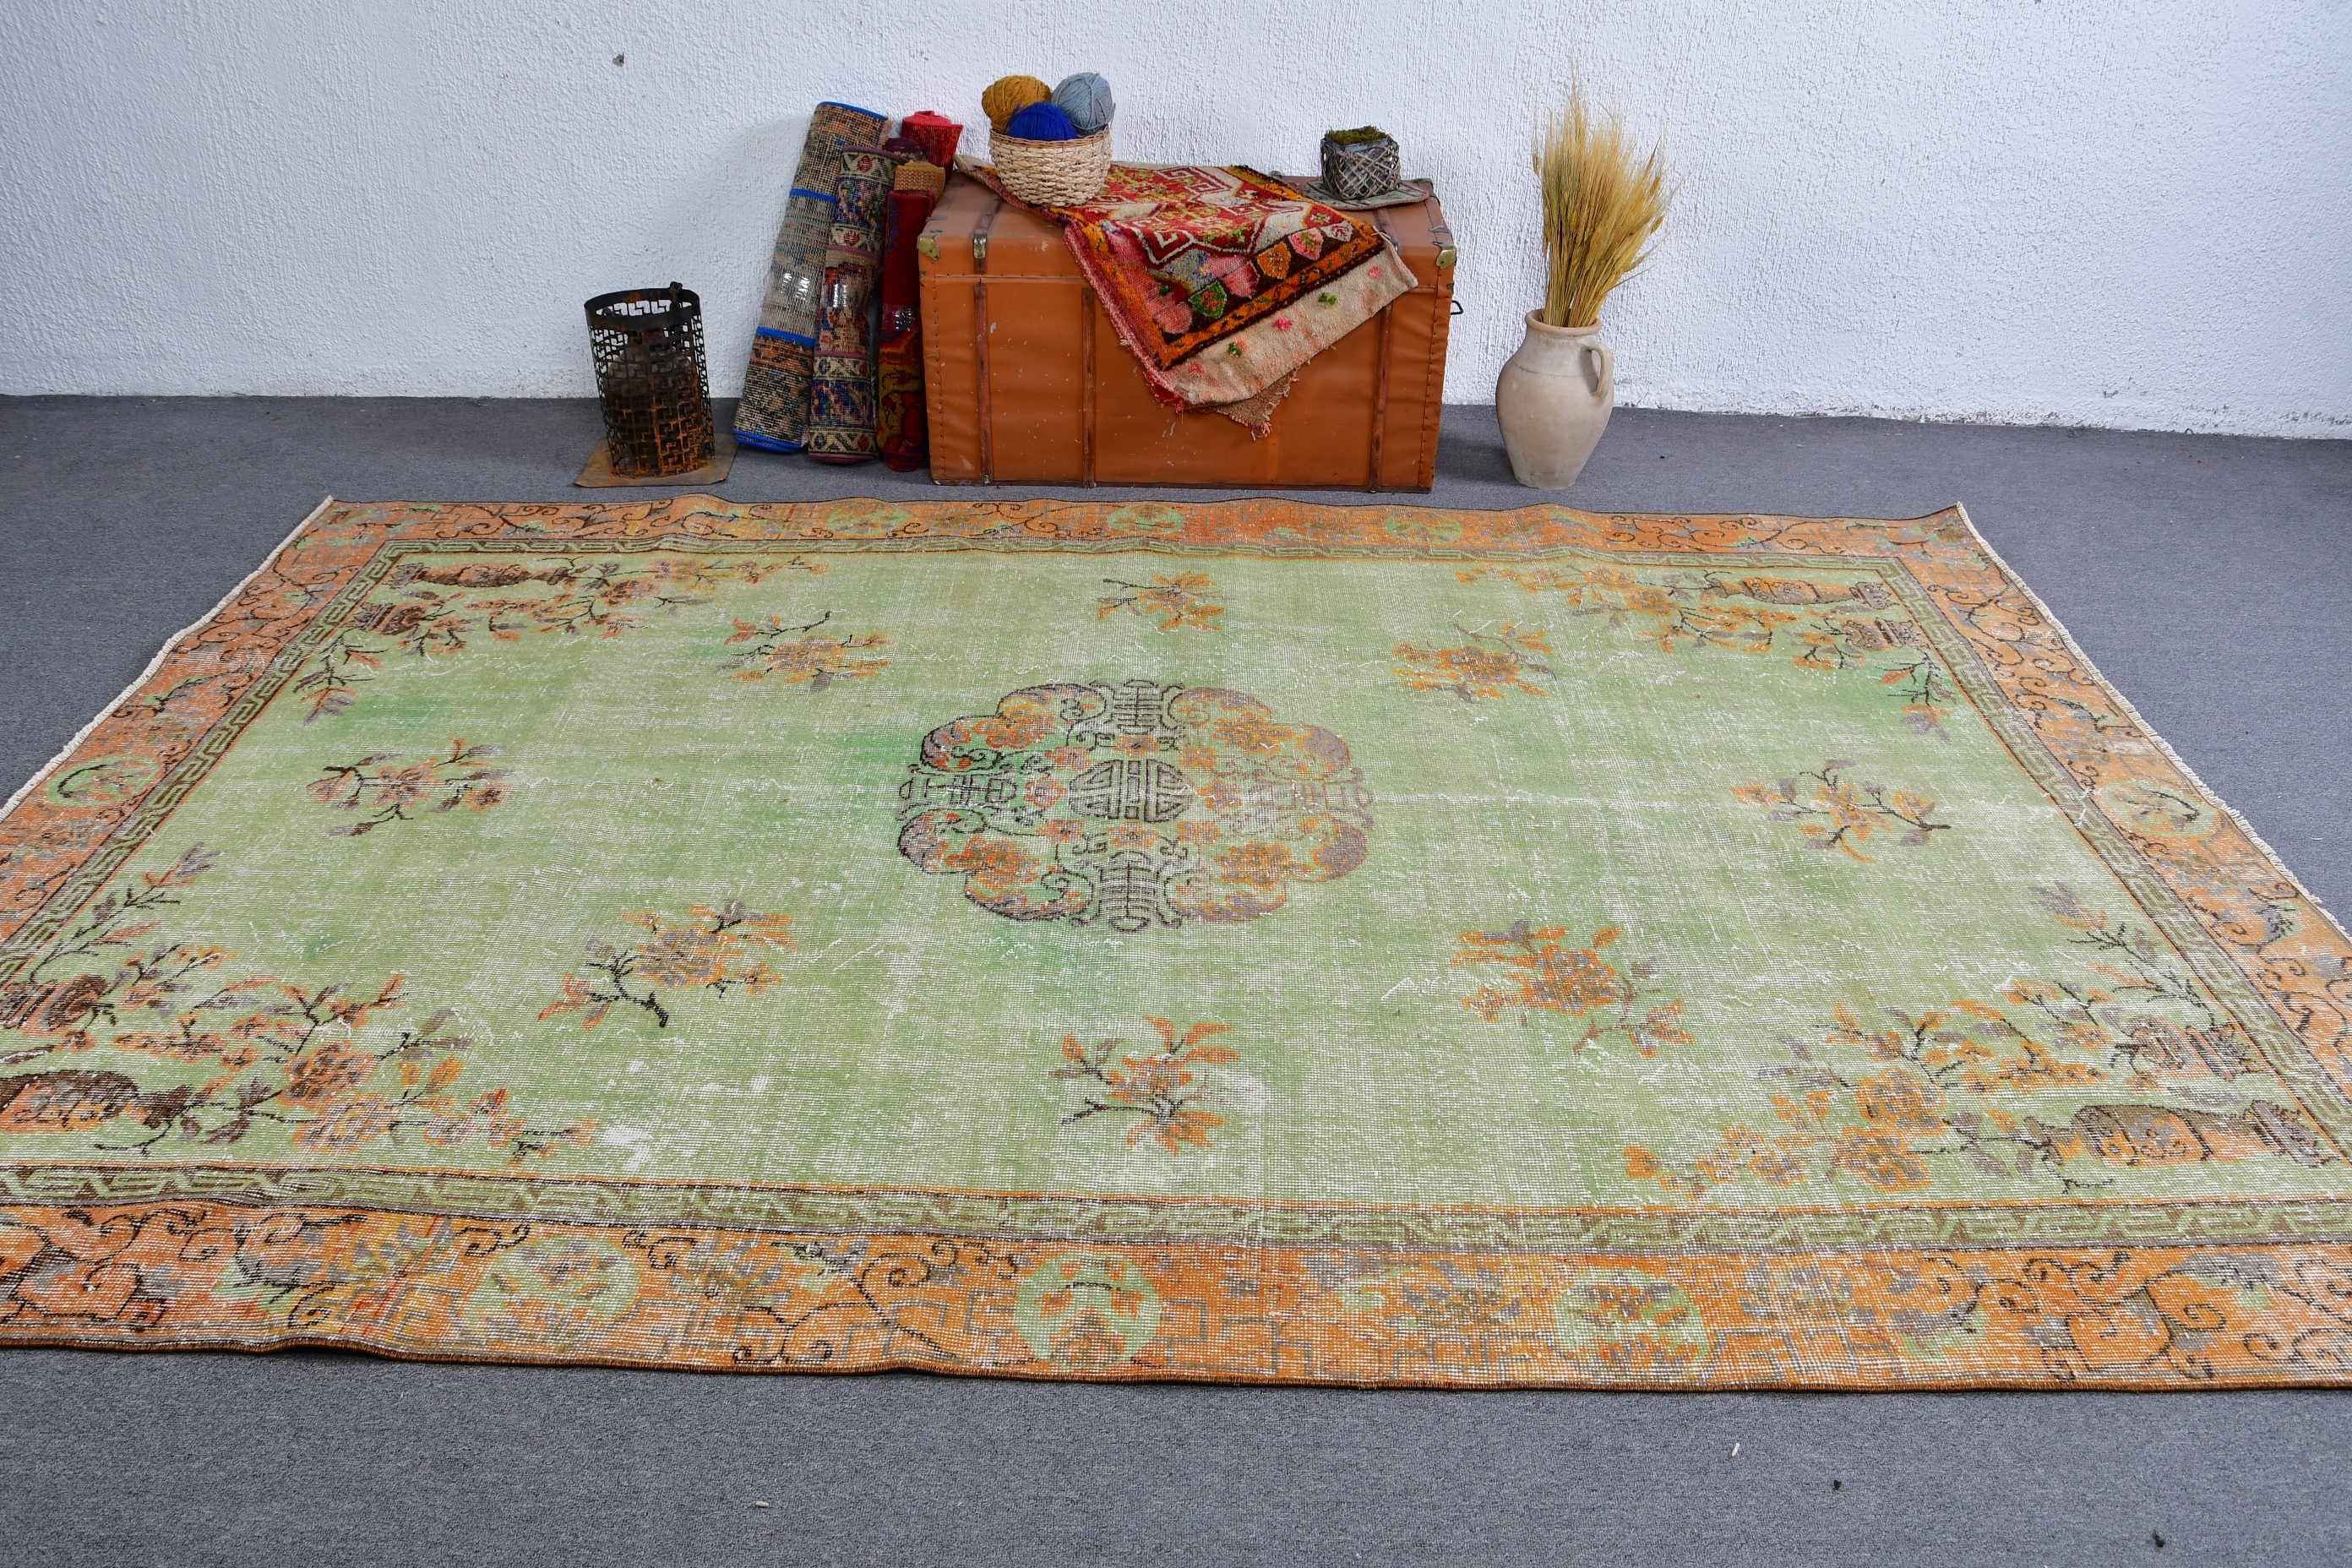 Salon Rugs, Vintage Rug, Wool Rug, Dining Room Rugs, 7.1x10.5 ft Oversize Rug, Bright Rug, Turkish Rugs, Kitchen Rugs, Rugs for Living Room